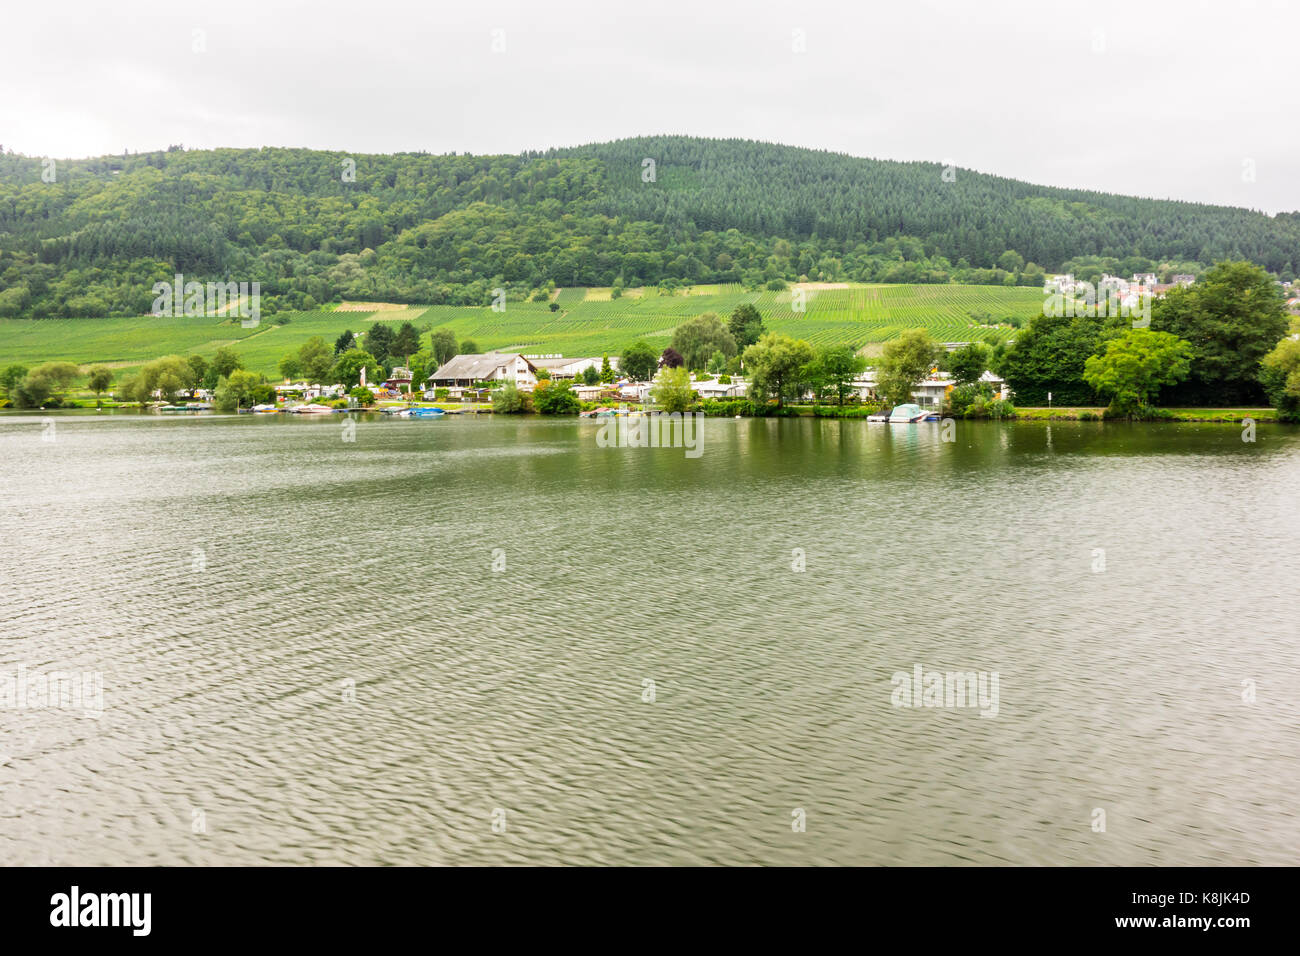 MEHRING, GERMANY - 5TH Aug 17: Mehring is a district of Trier with river  views of the Moselle Stock Photo - Alamy